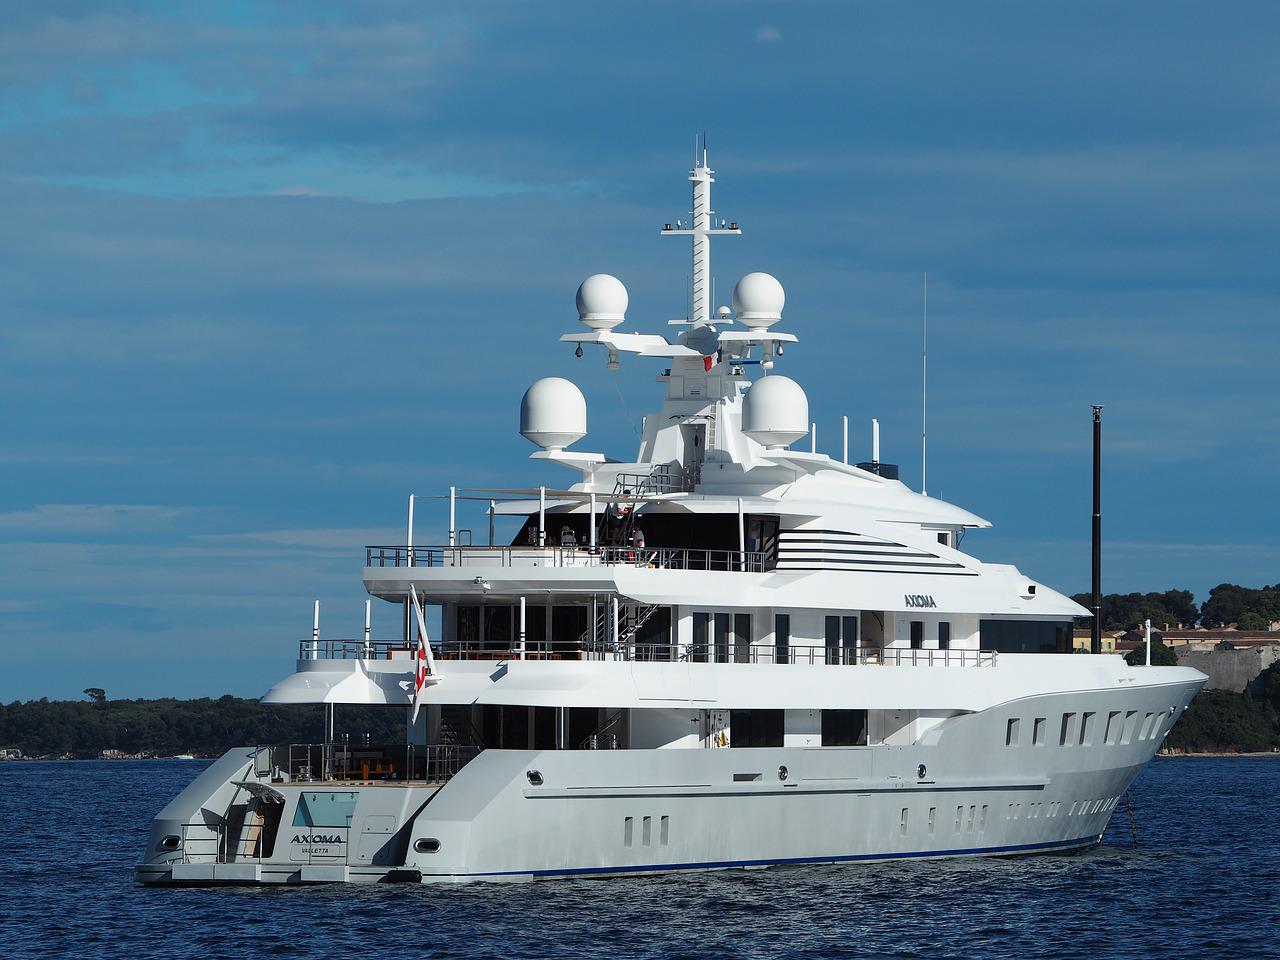 Superyacht linked to sanctioned Russian on sale for 29.5 mln euros